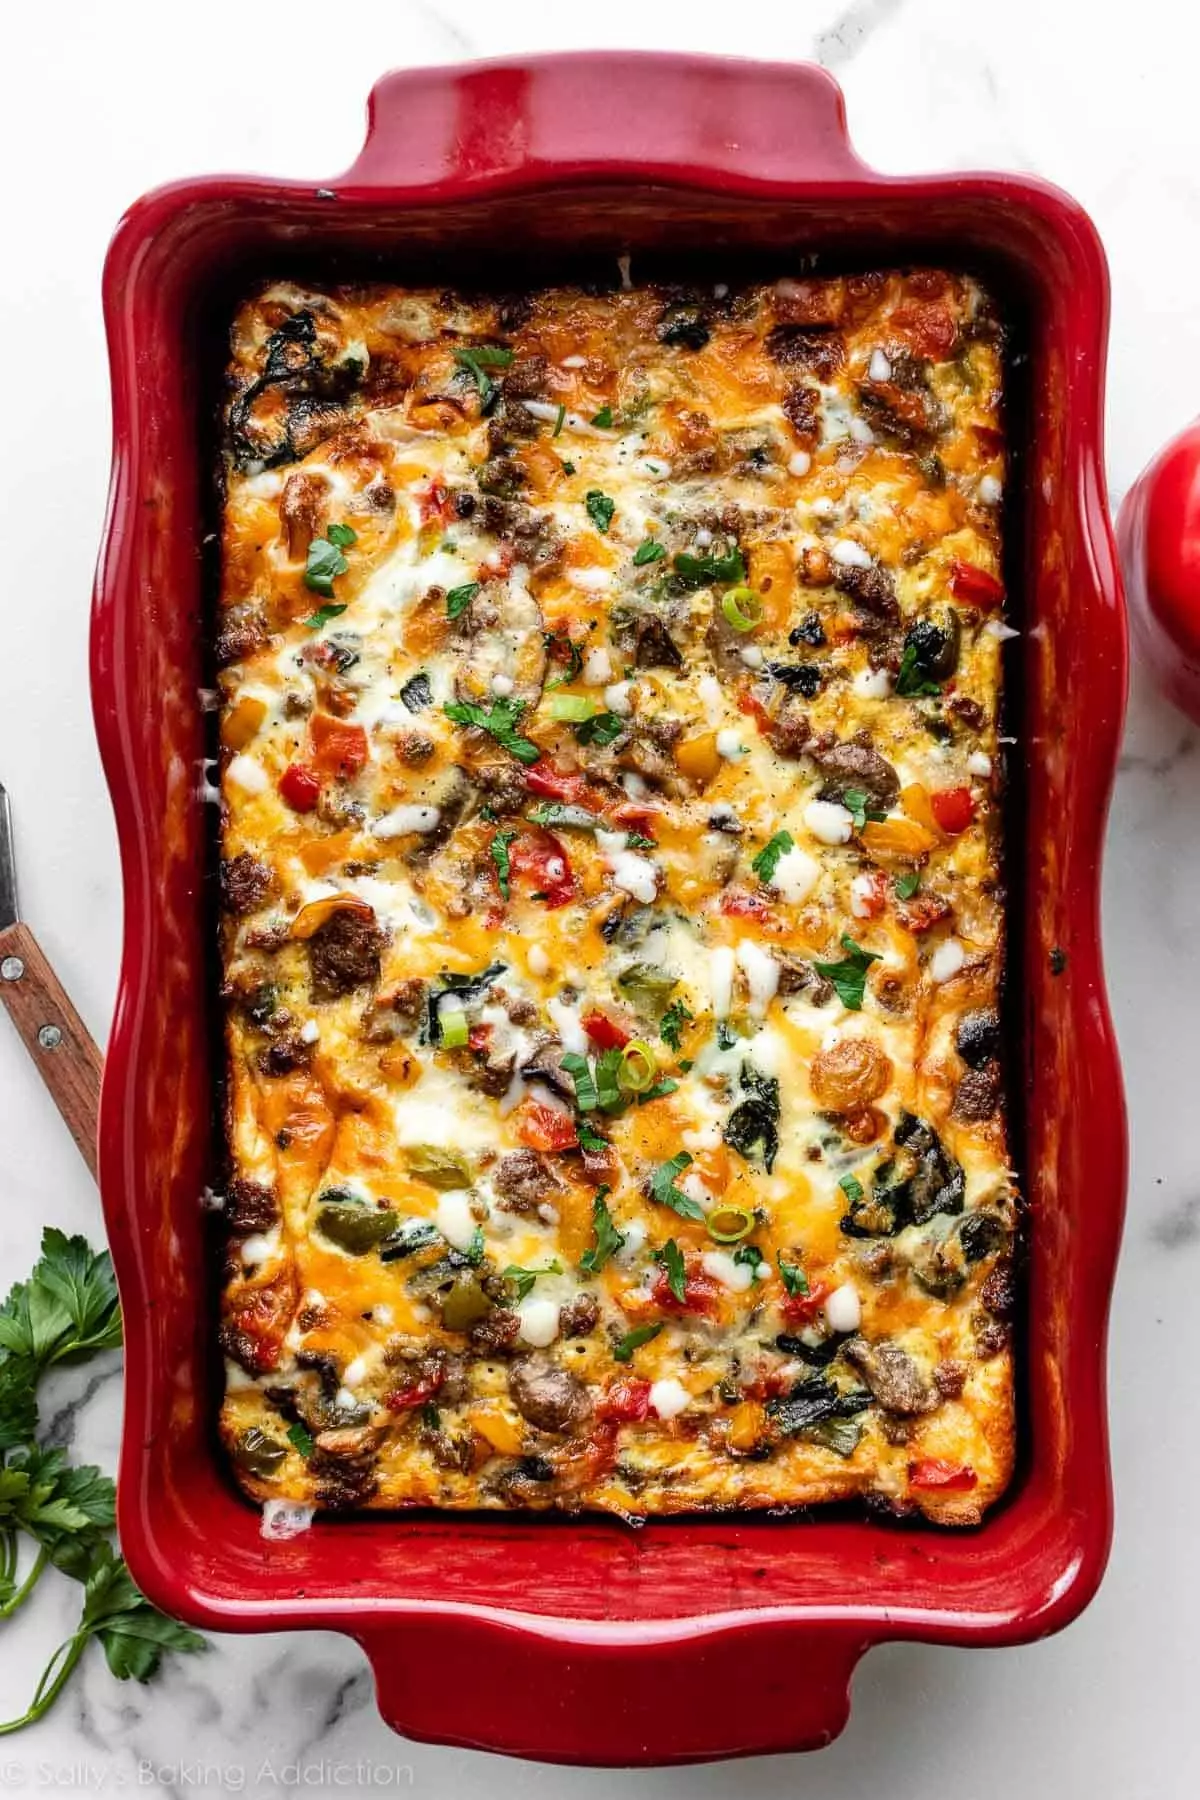 baked egg cheese and sausage breakfast casserole in a red casserole dish.